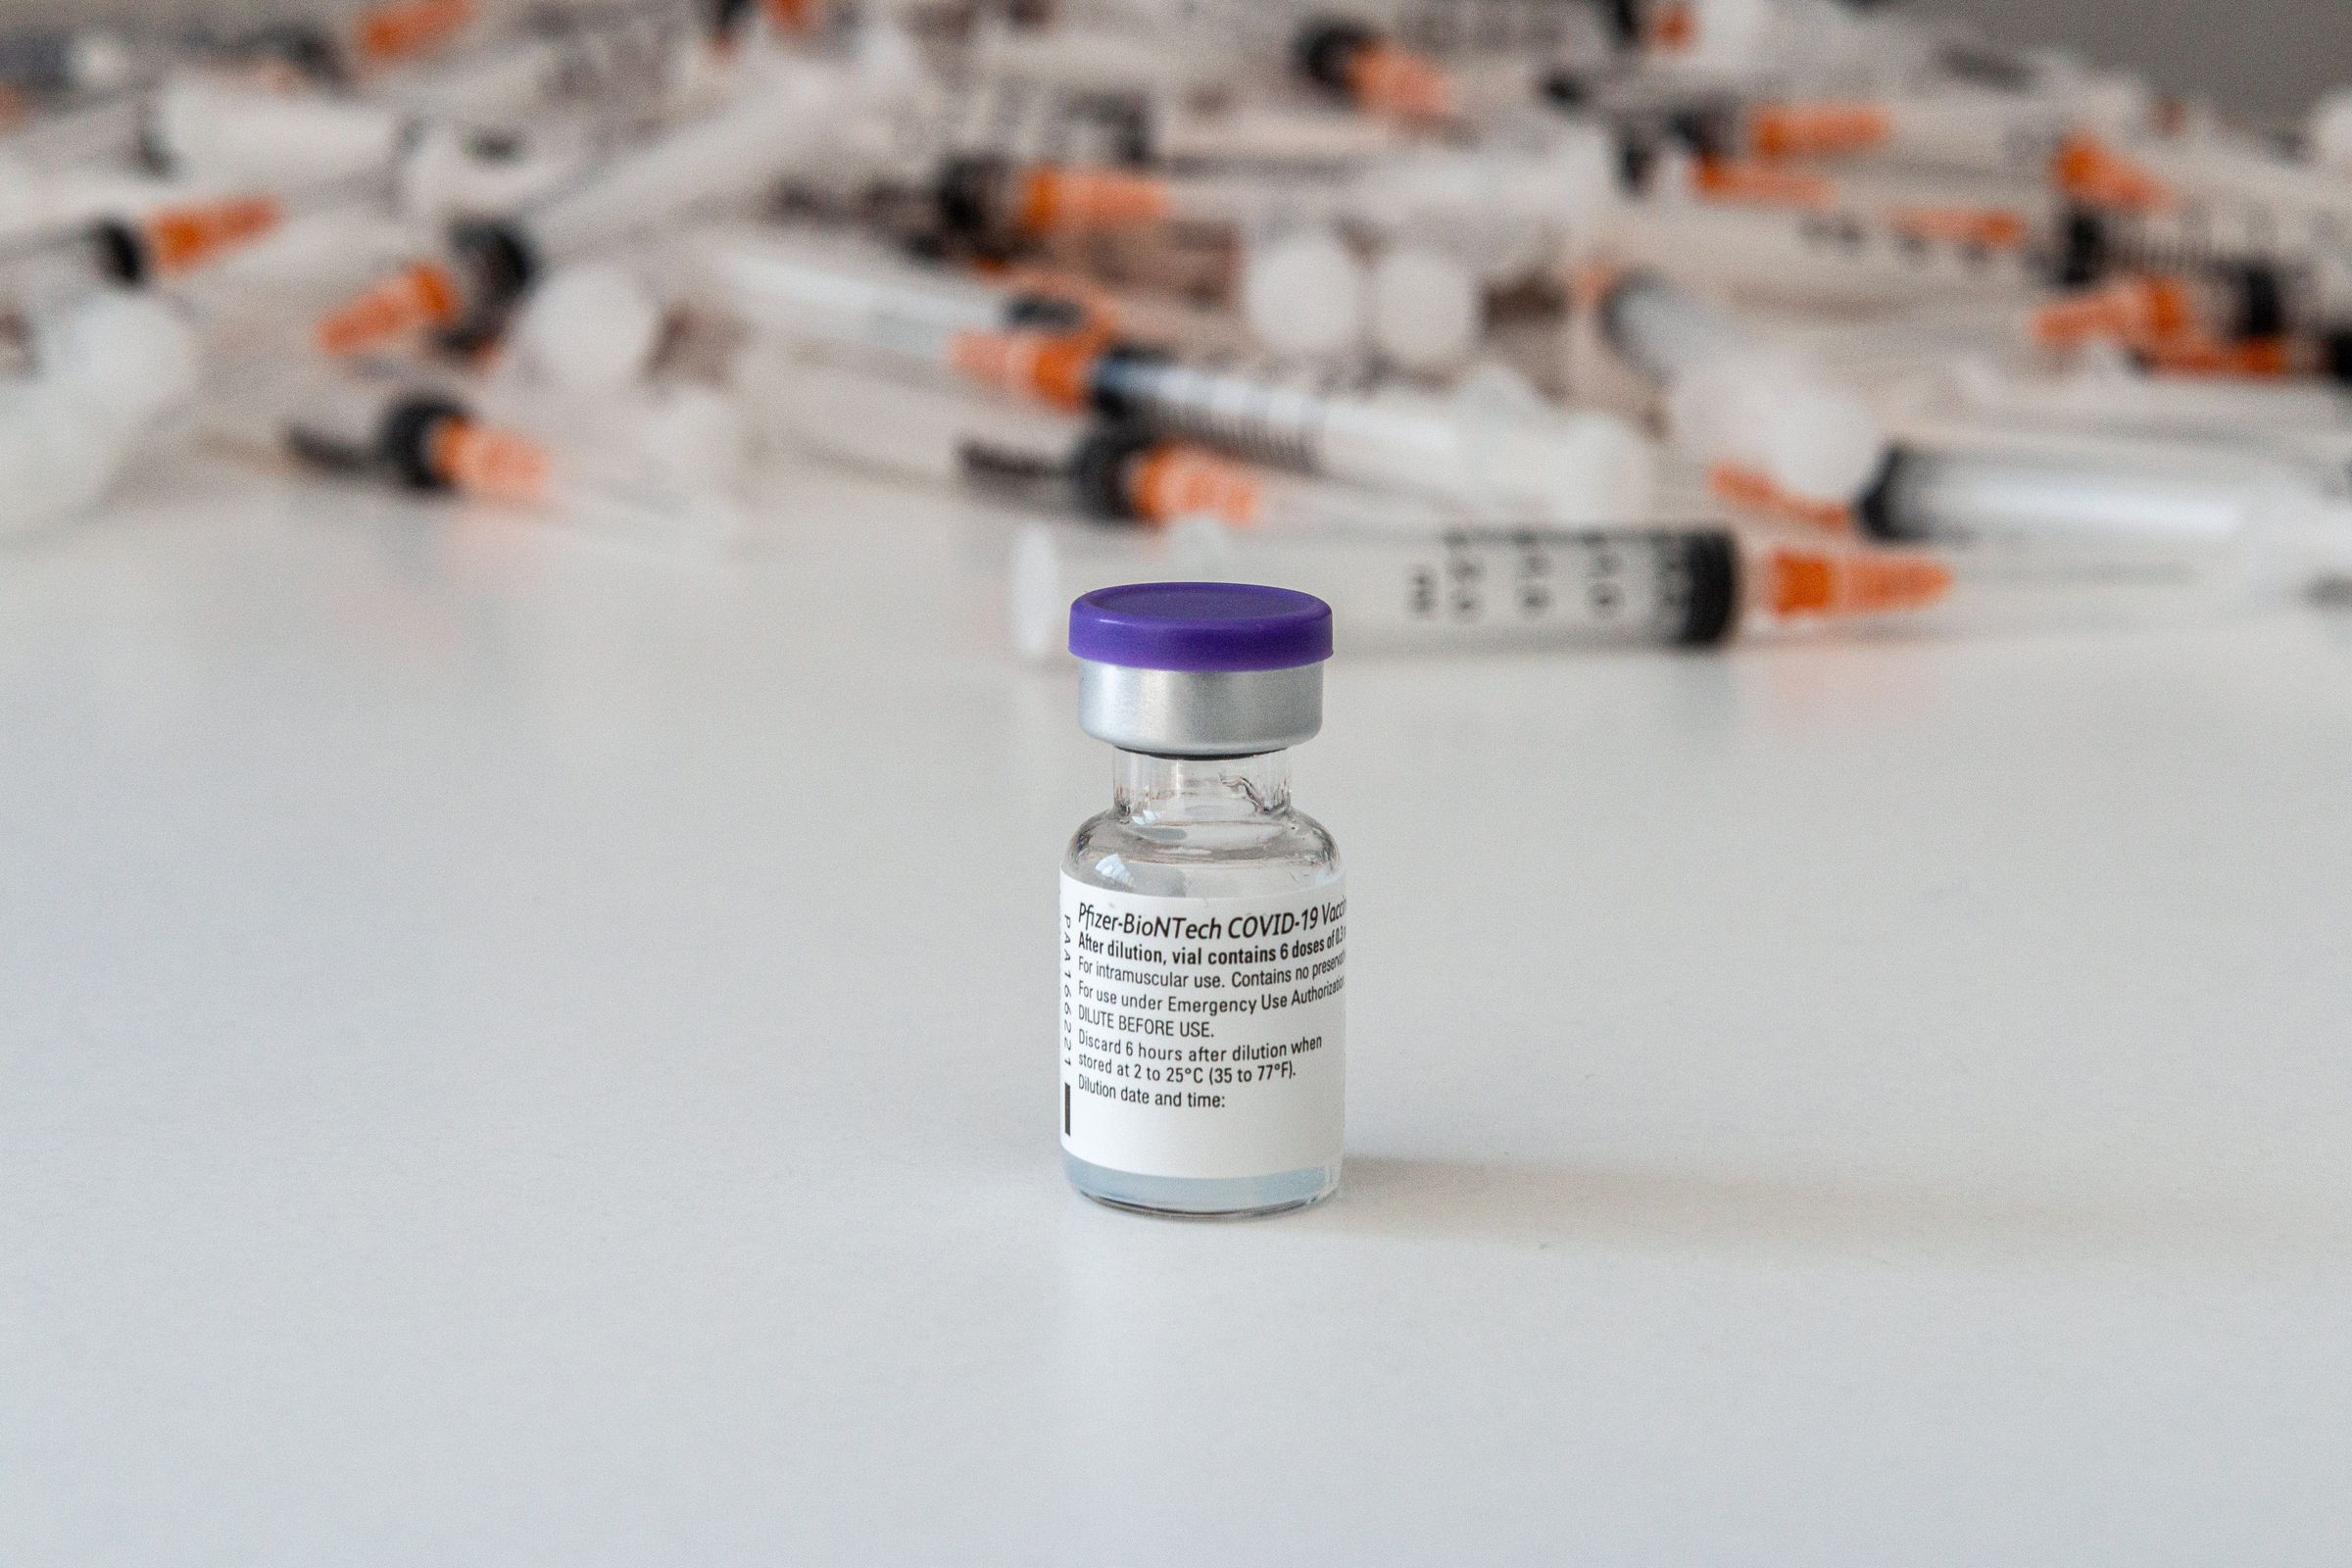 Biontech vaccine vial is seen infornt of syringes during a...